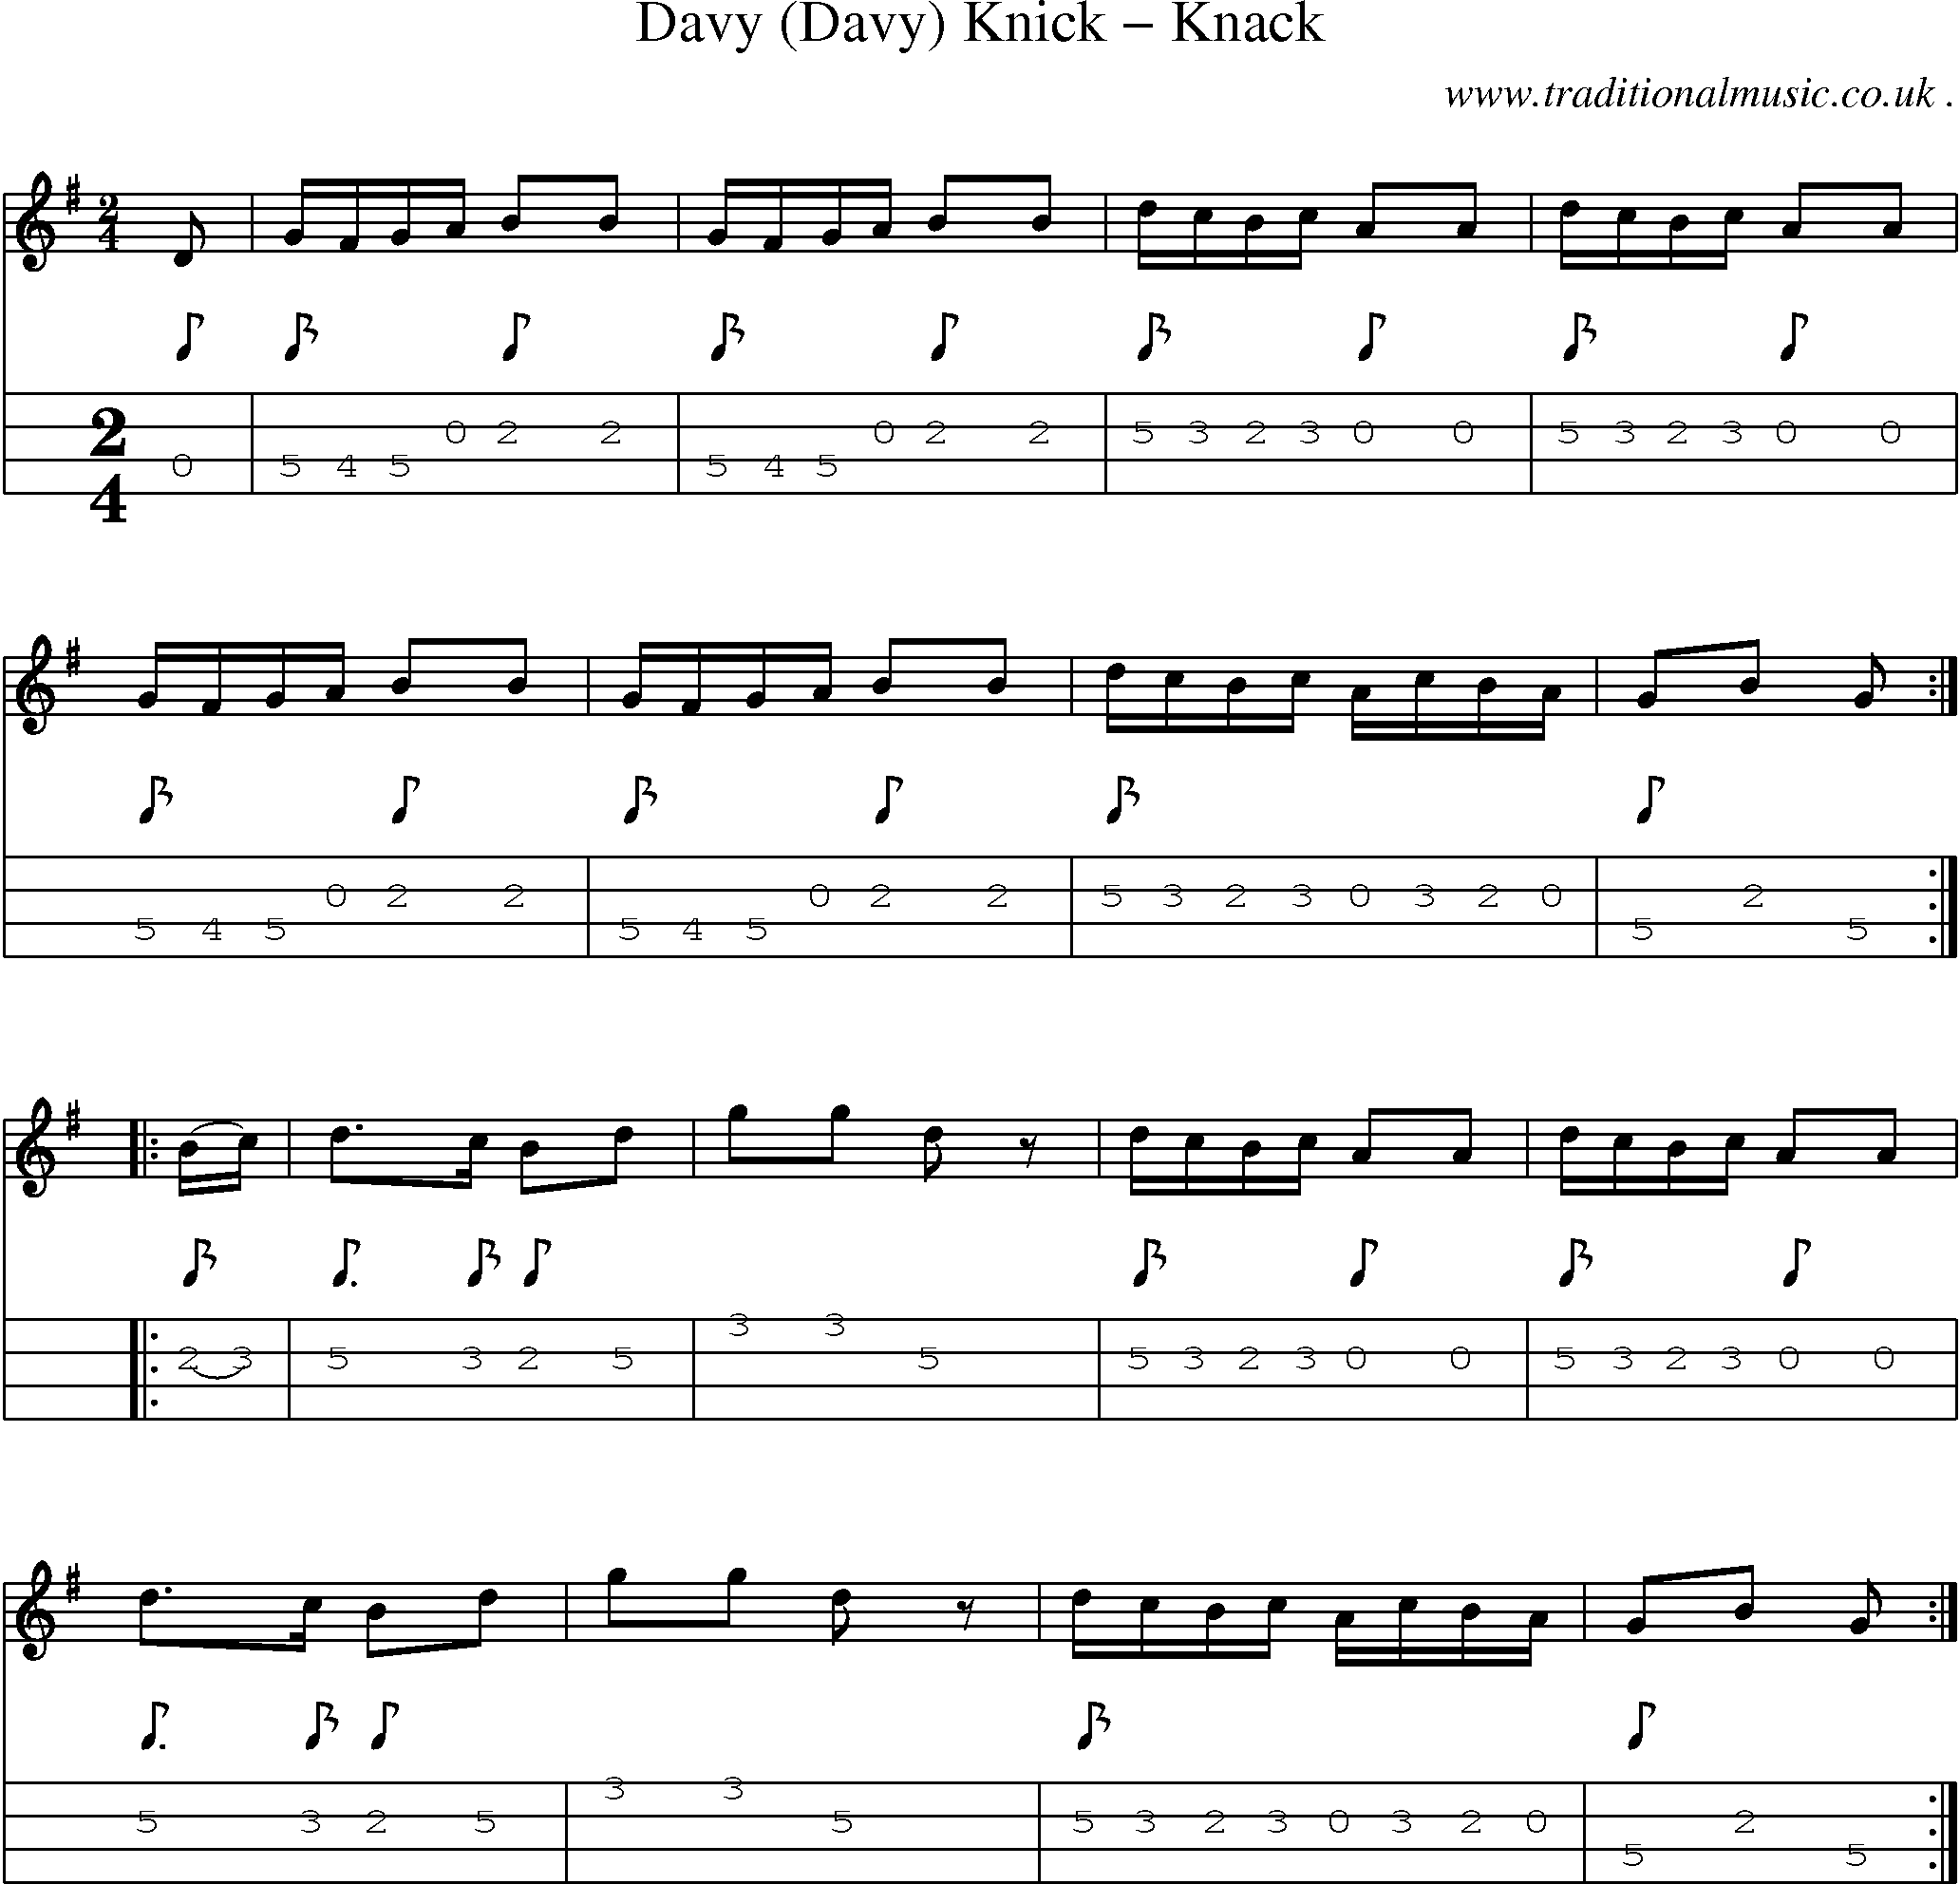 Sheet-Music and Mandolin Tabs for Davy (davy) Knick Knack